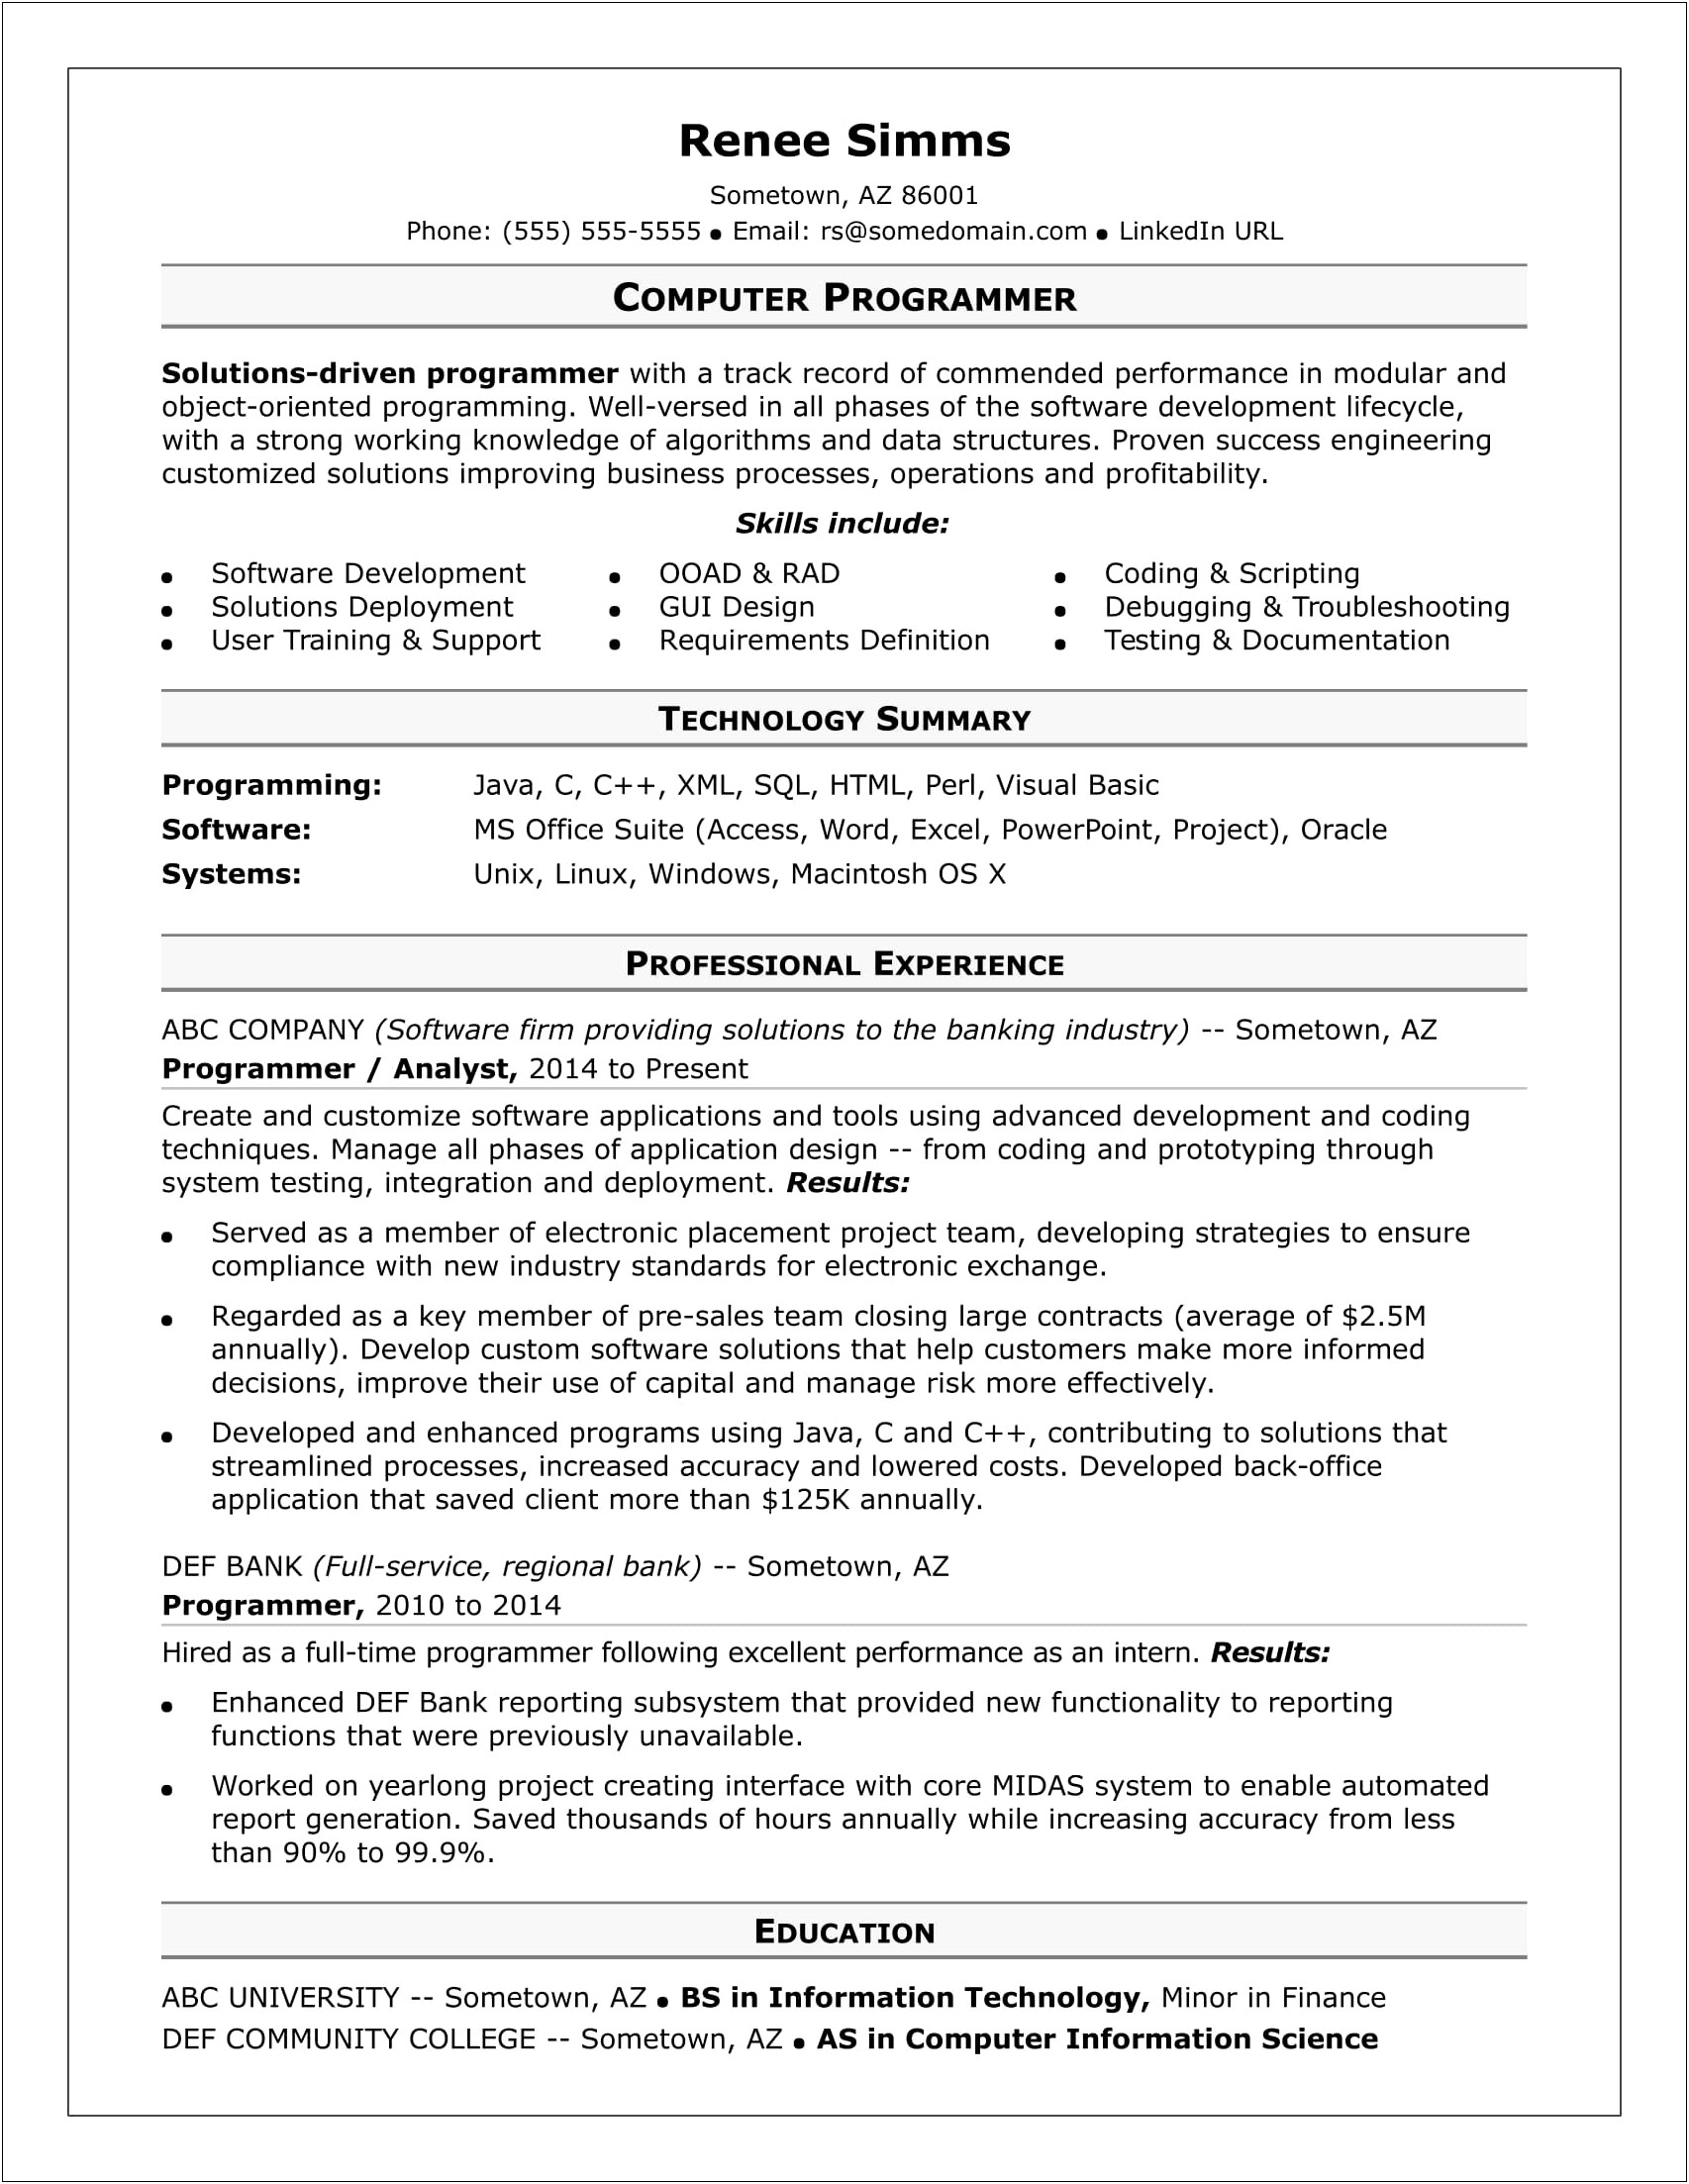 Job Resume That Includes Community College In Education